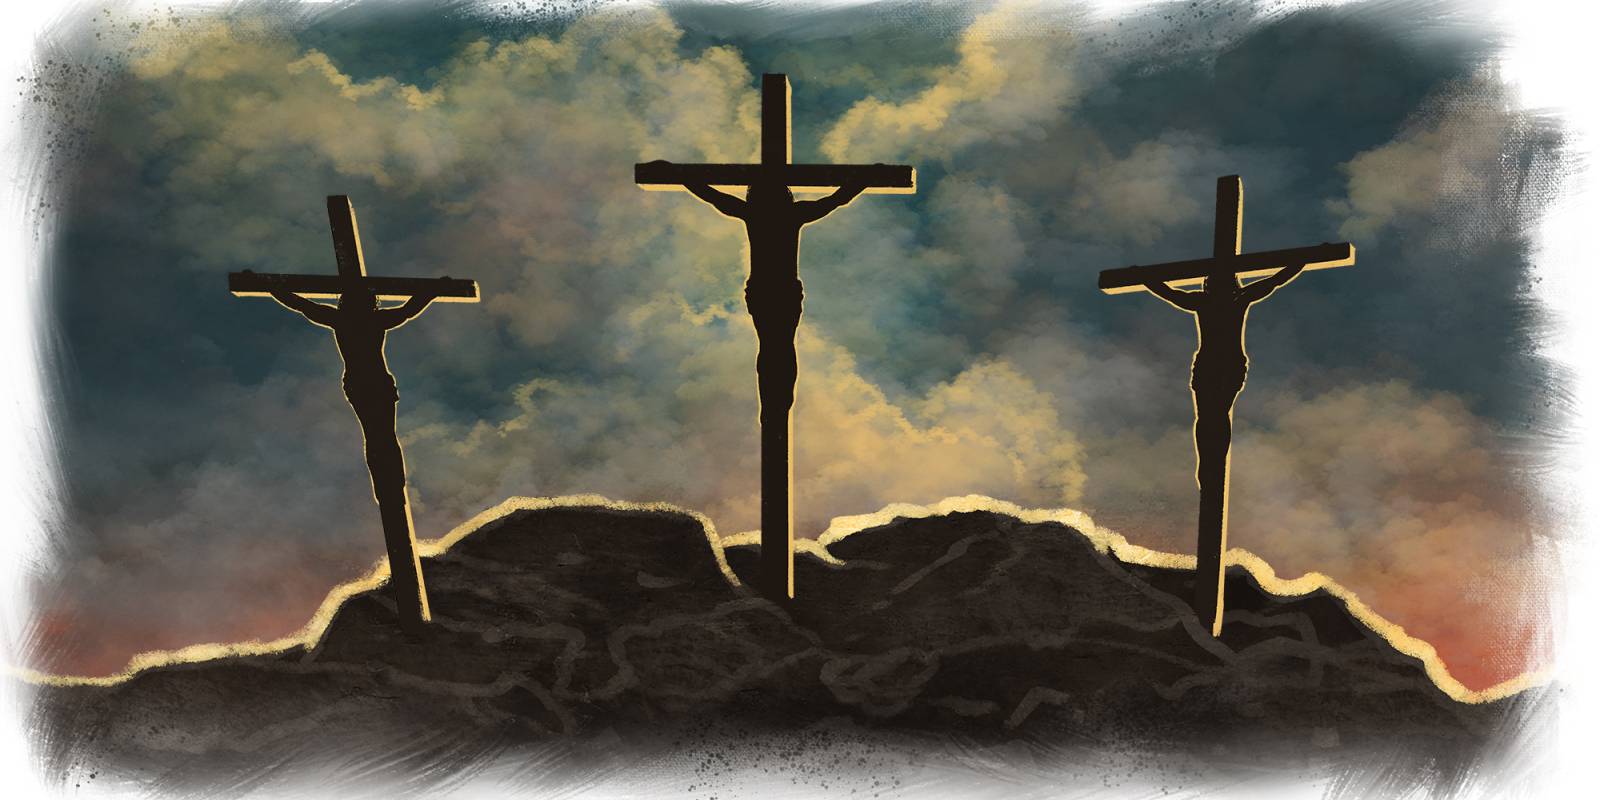 Three people being crucified on three crosses